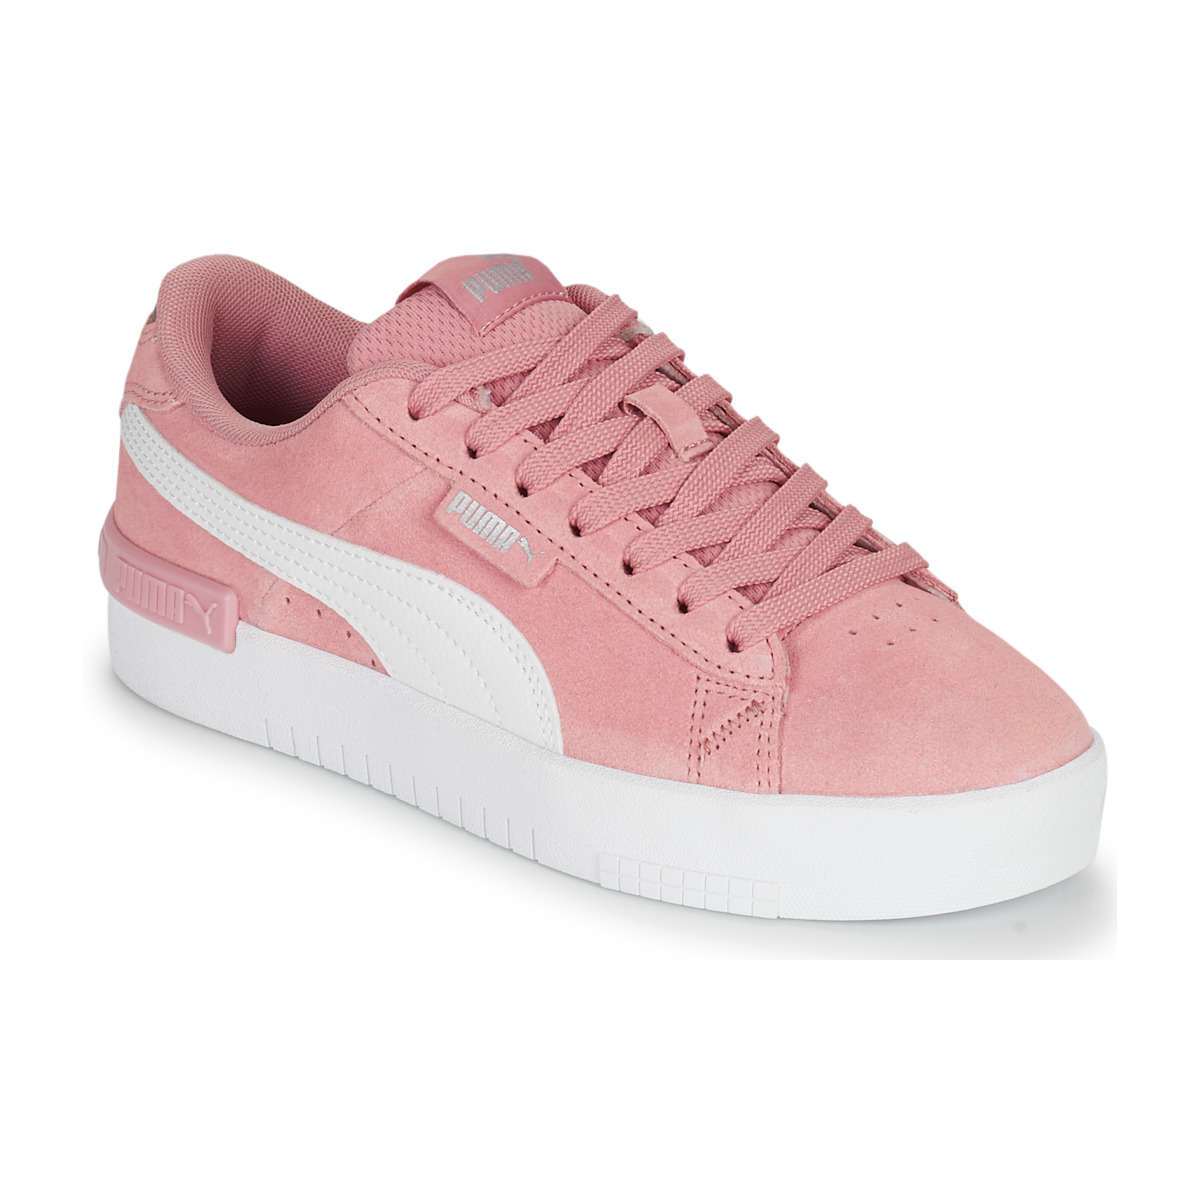 Puma JADA Pink NET / Free White Spartoo top ! - delivery | - Women Low trainers Shoes